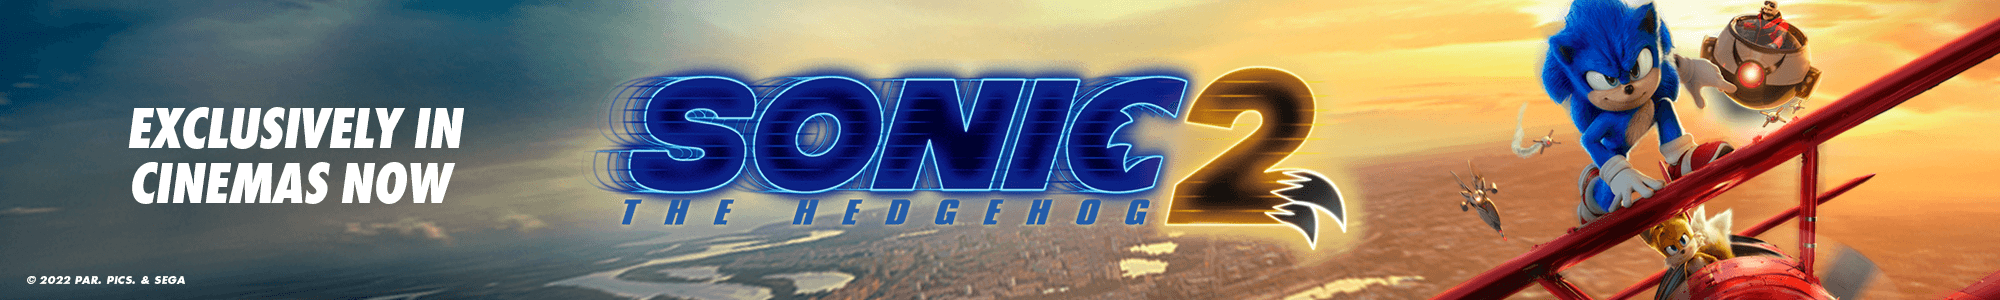 header-sonic-2-2000x300.png